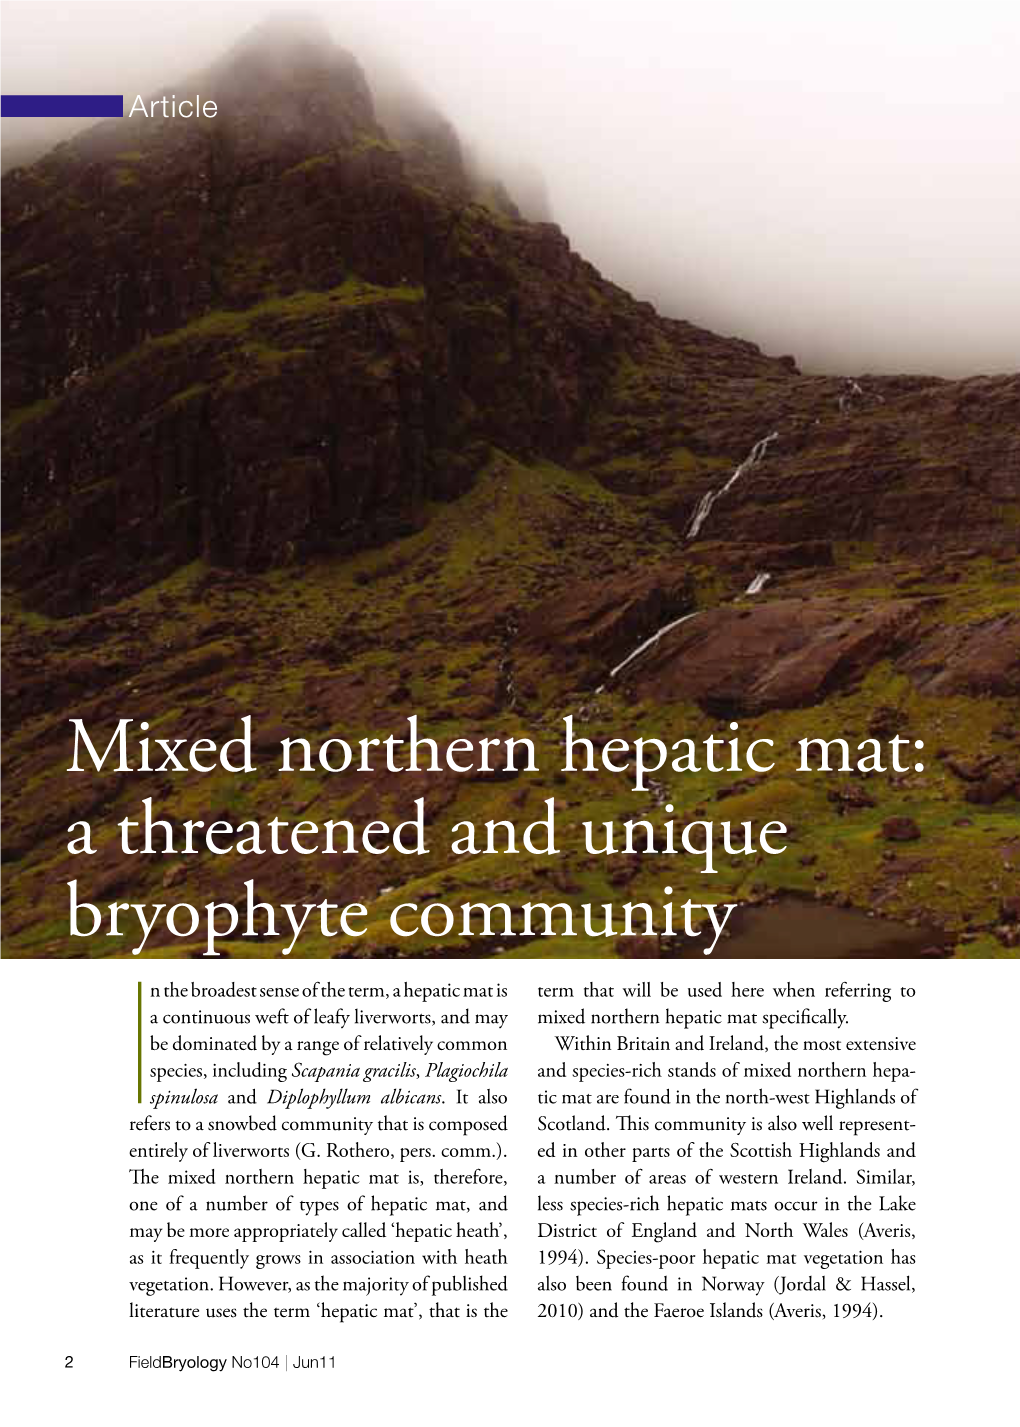 Mixed Northern Hepatic Mat, Or Hepatic Heath, Is One of the Most Beautiful and Conspicuous Bryophyte Communities Found in Britain and Ireland